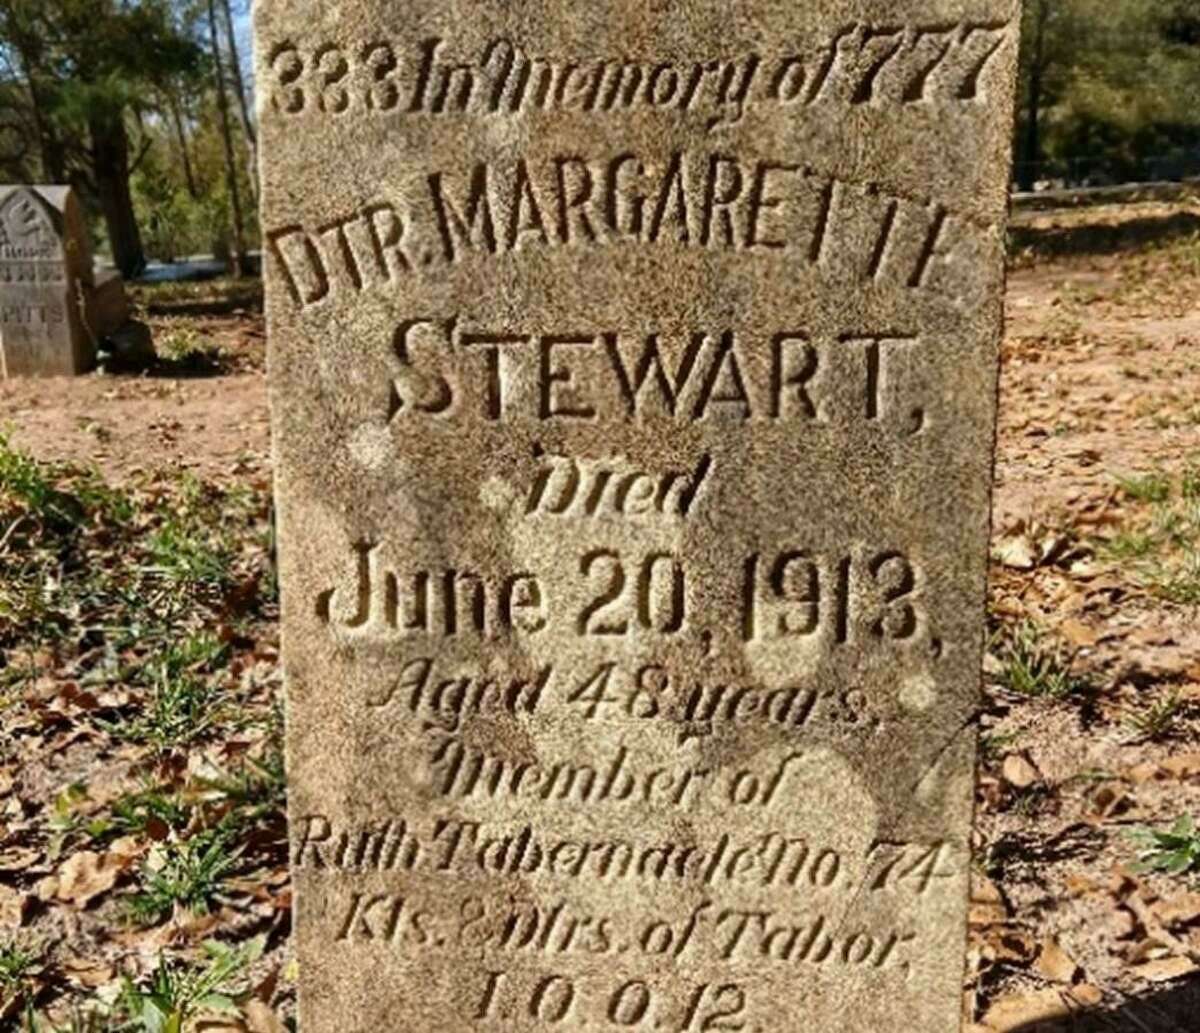 Margarette Stewart, buried in the Conroe Community Cemetery on 10th Street was a member of the Daughters of Tabor. More is sought on the early Black fraternal organization.